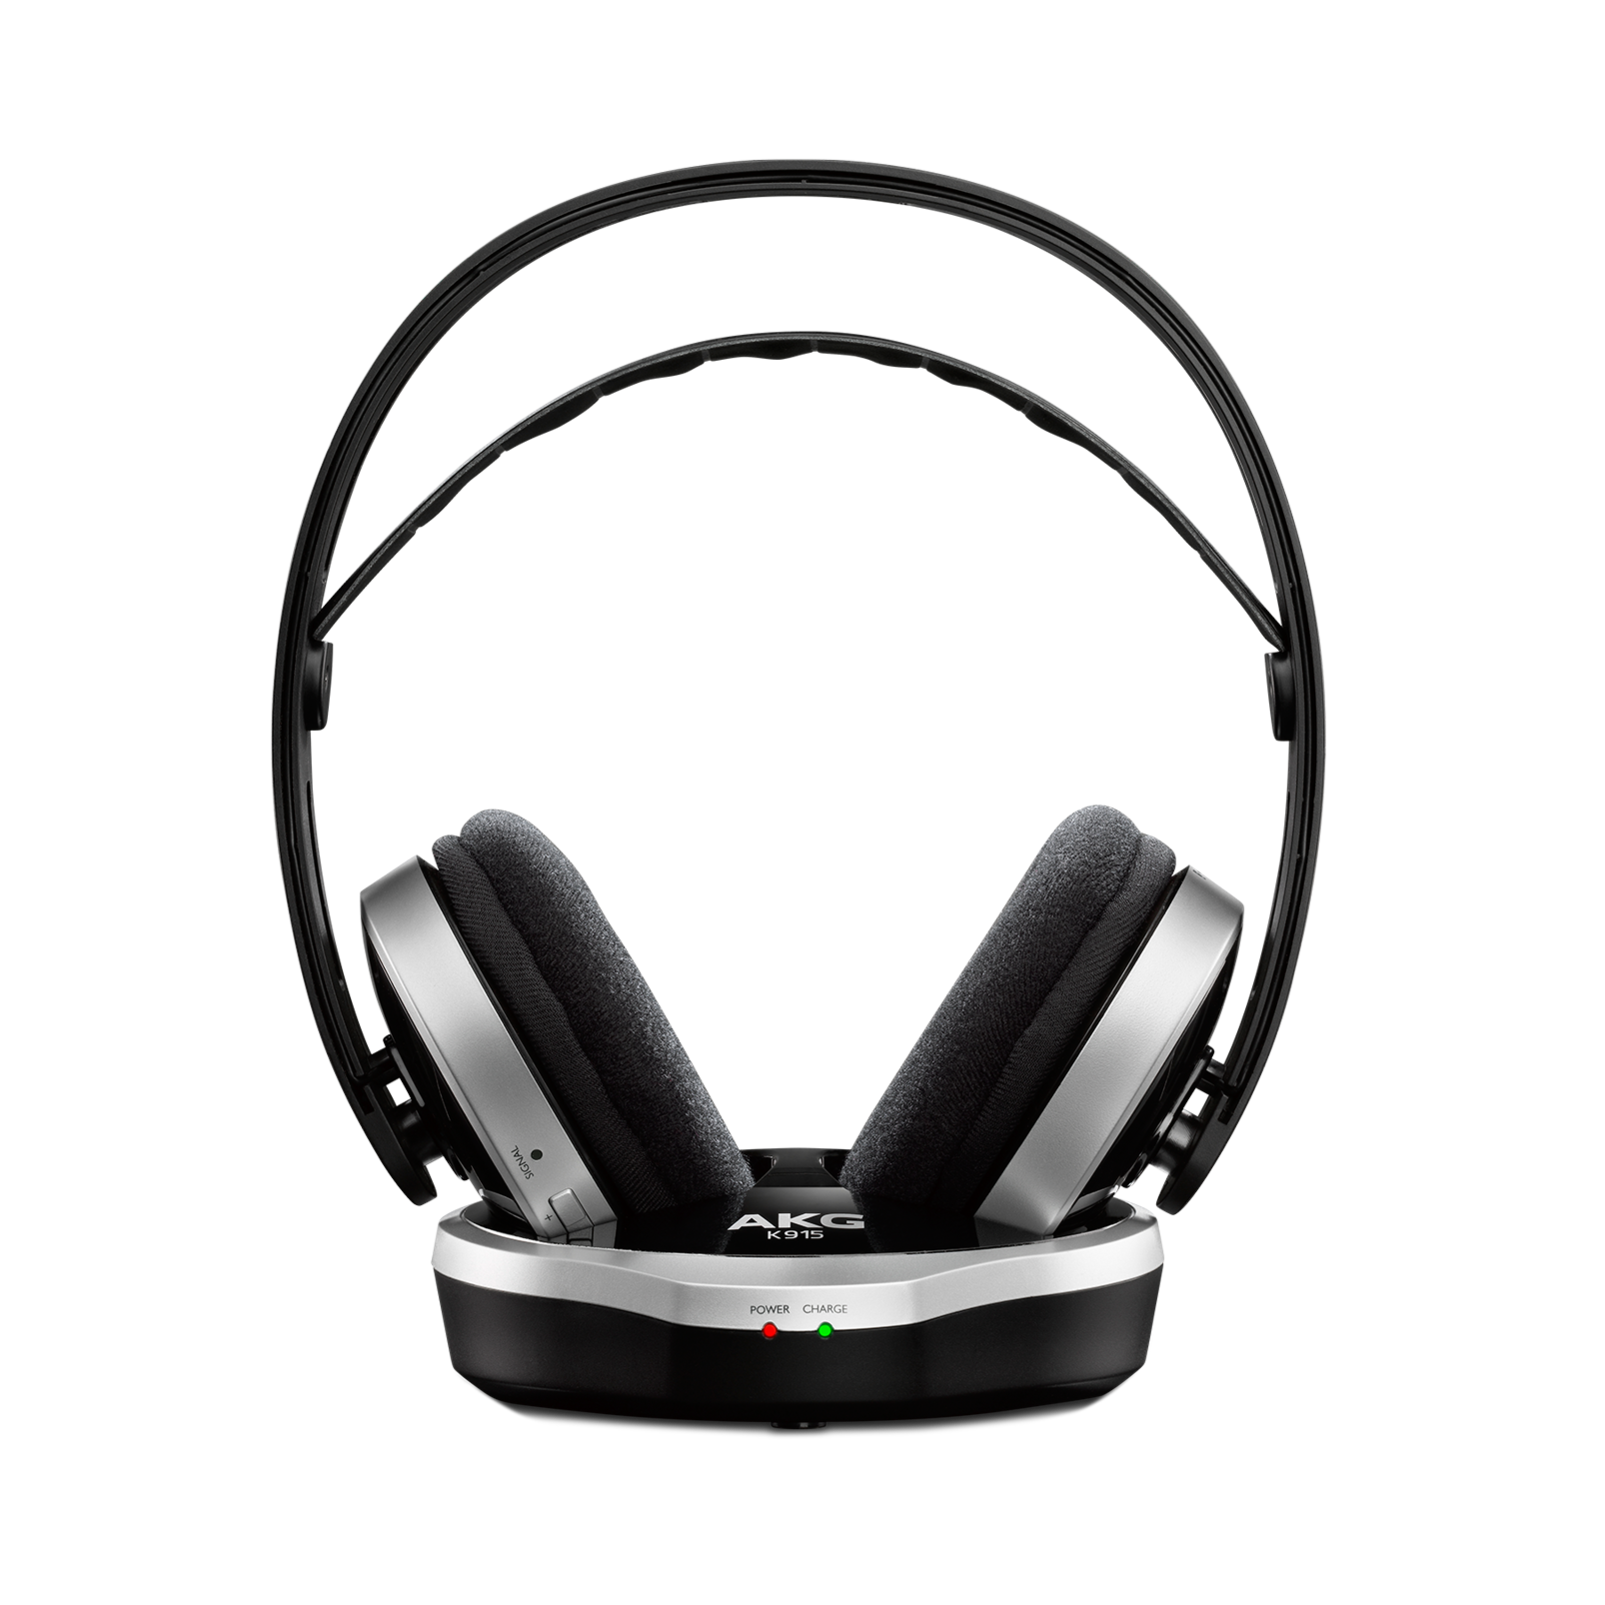 K 915 - Black - Digital wireless stereo headphone optimized for movies, games and music. - Detailshot 5